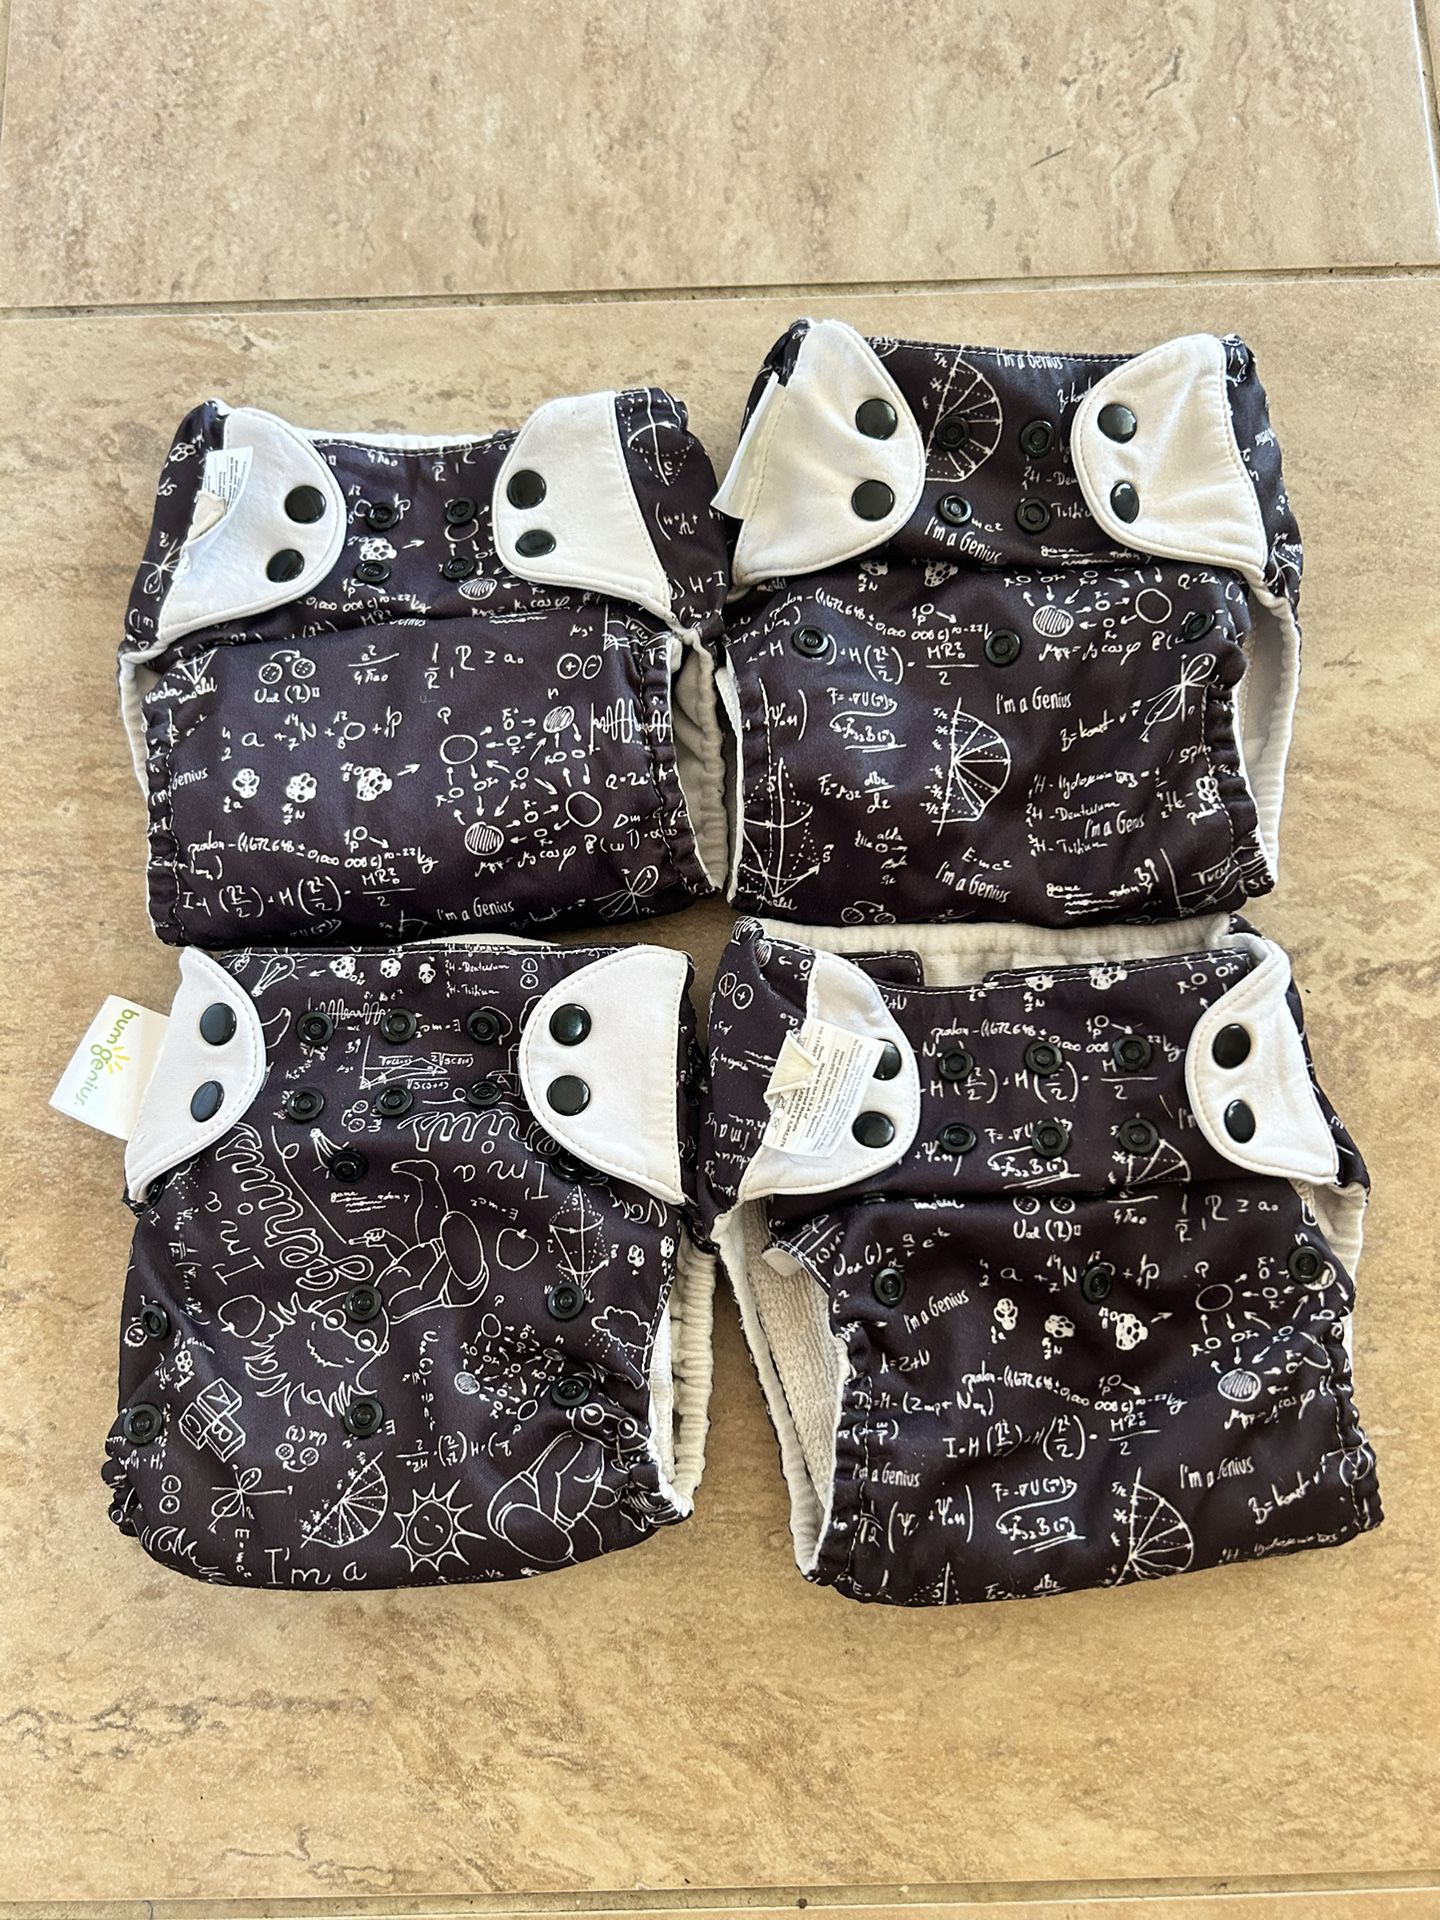 4 Baby BumGenius Adjustable Reusable Cloth Diapers w/ 6 Inserts (See Details)